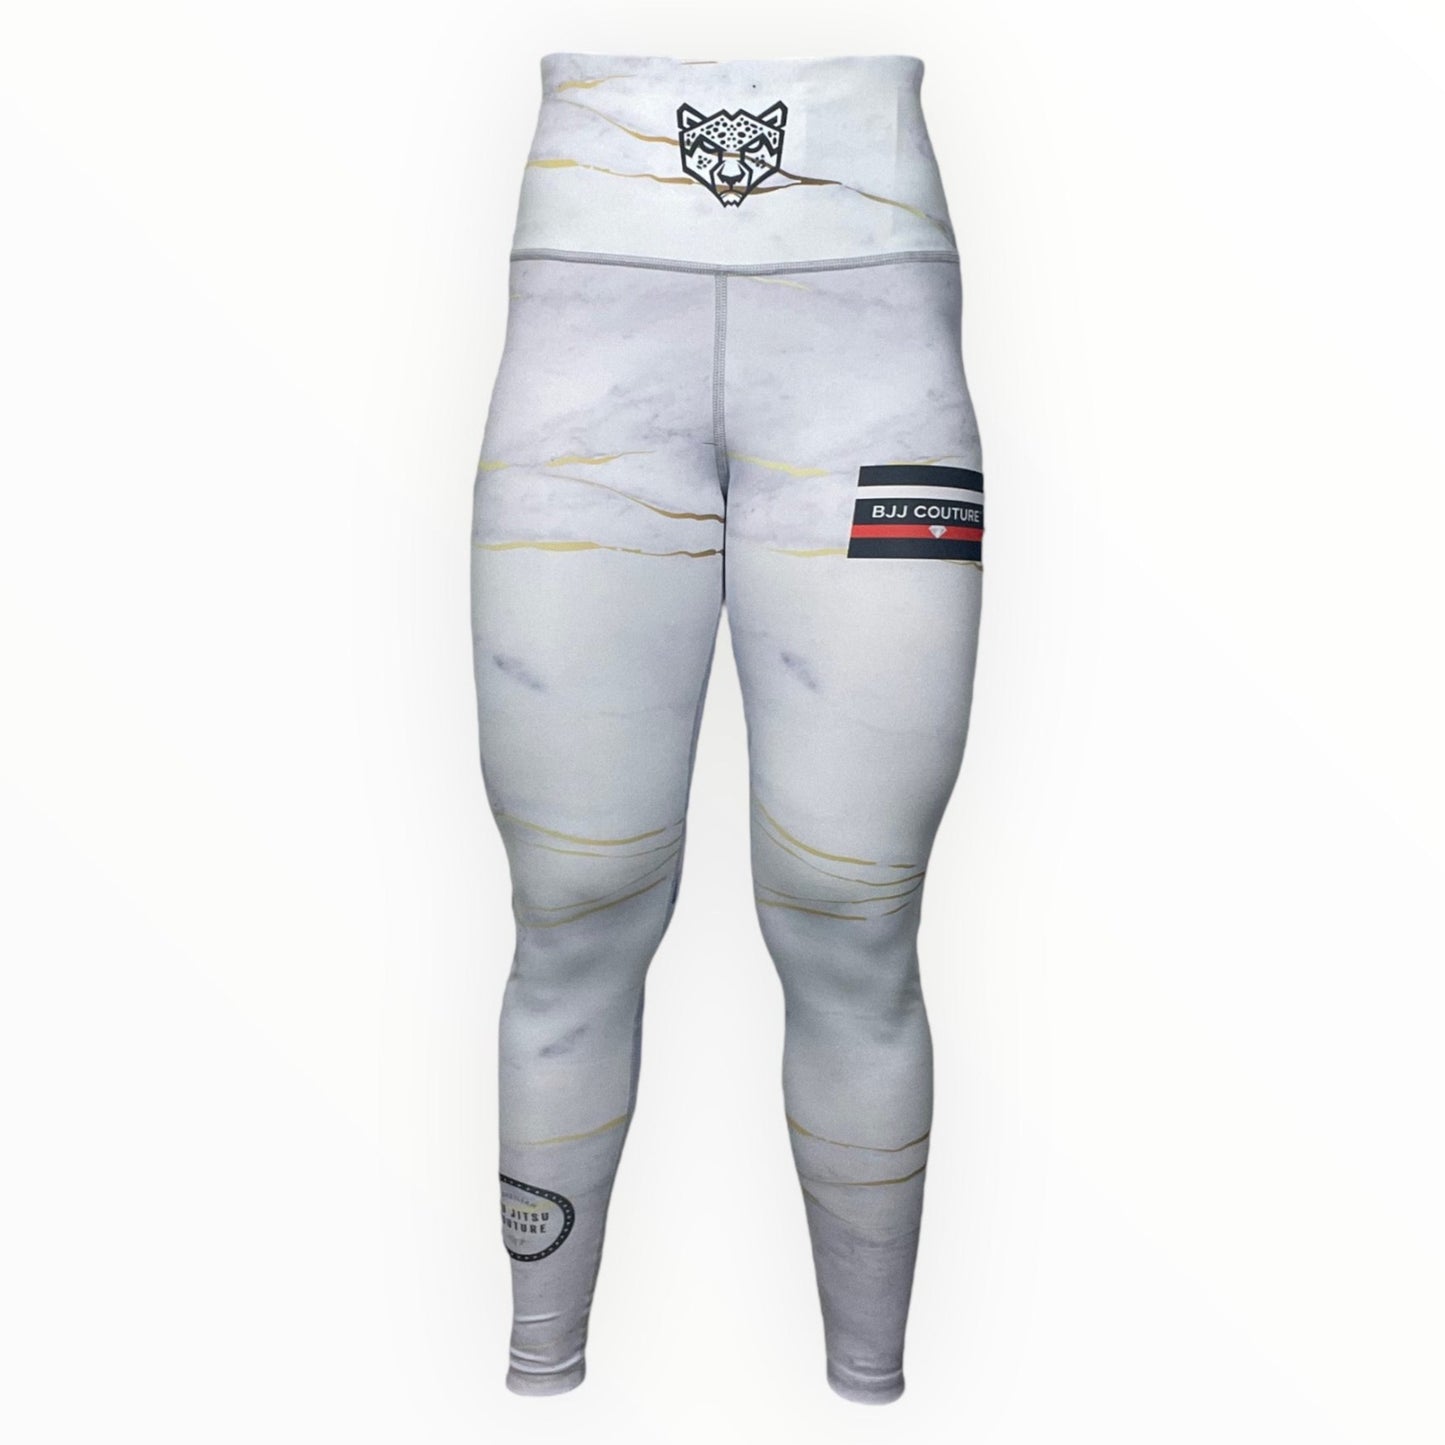 BJJ Couture Women's Compression Grappling Spats - White Carrara Marble with Gold Veining and Indigo Ink Spills